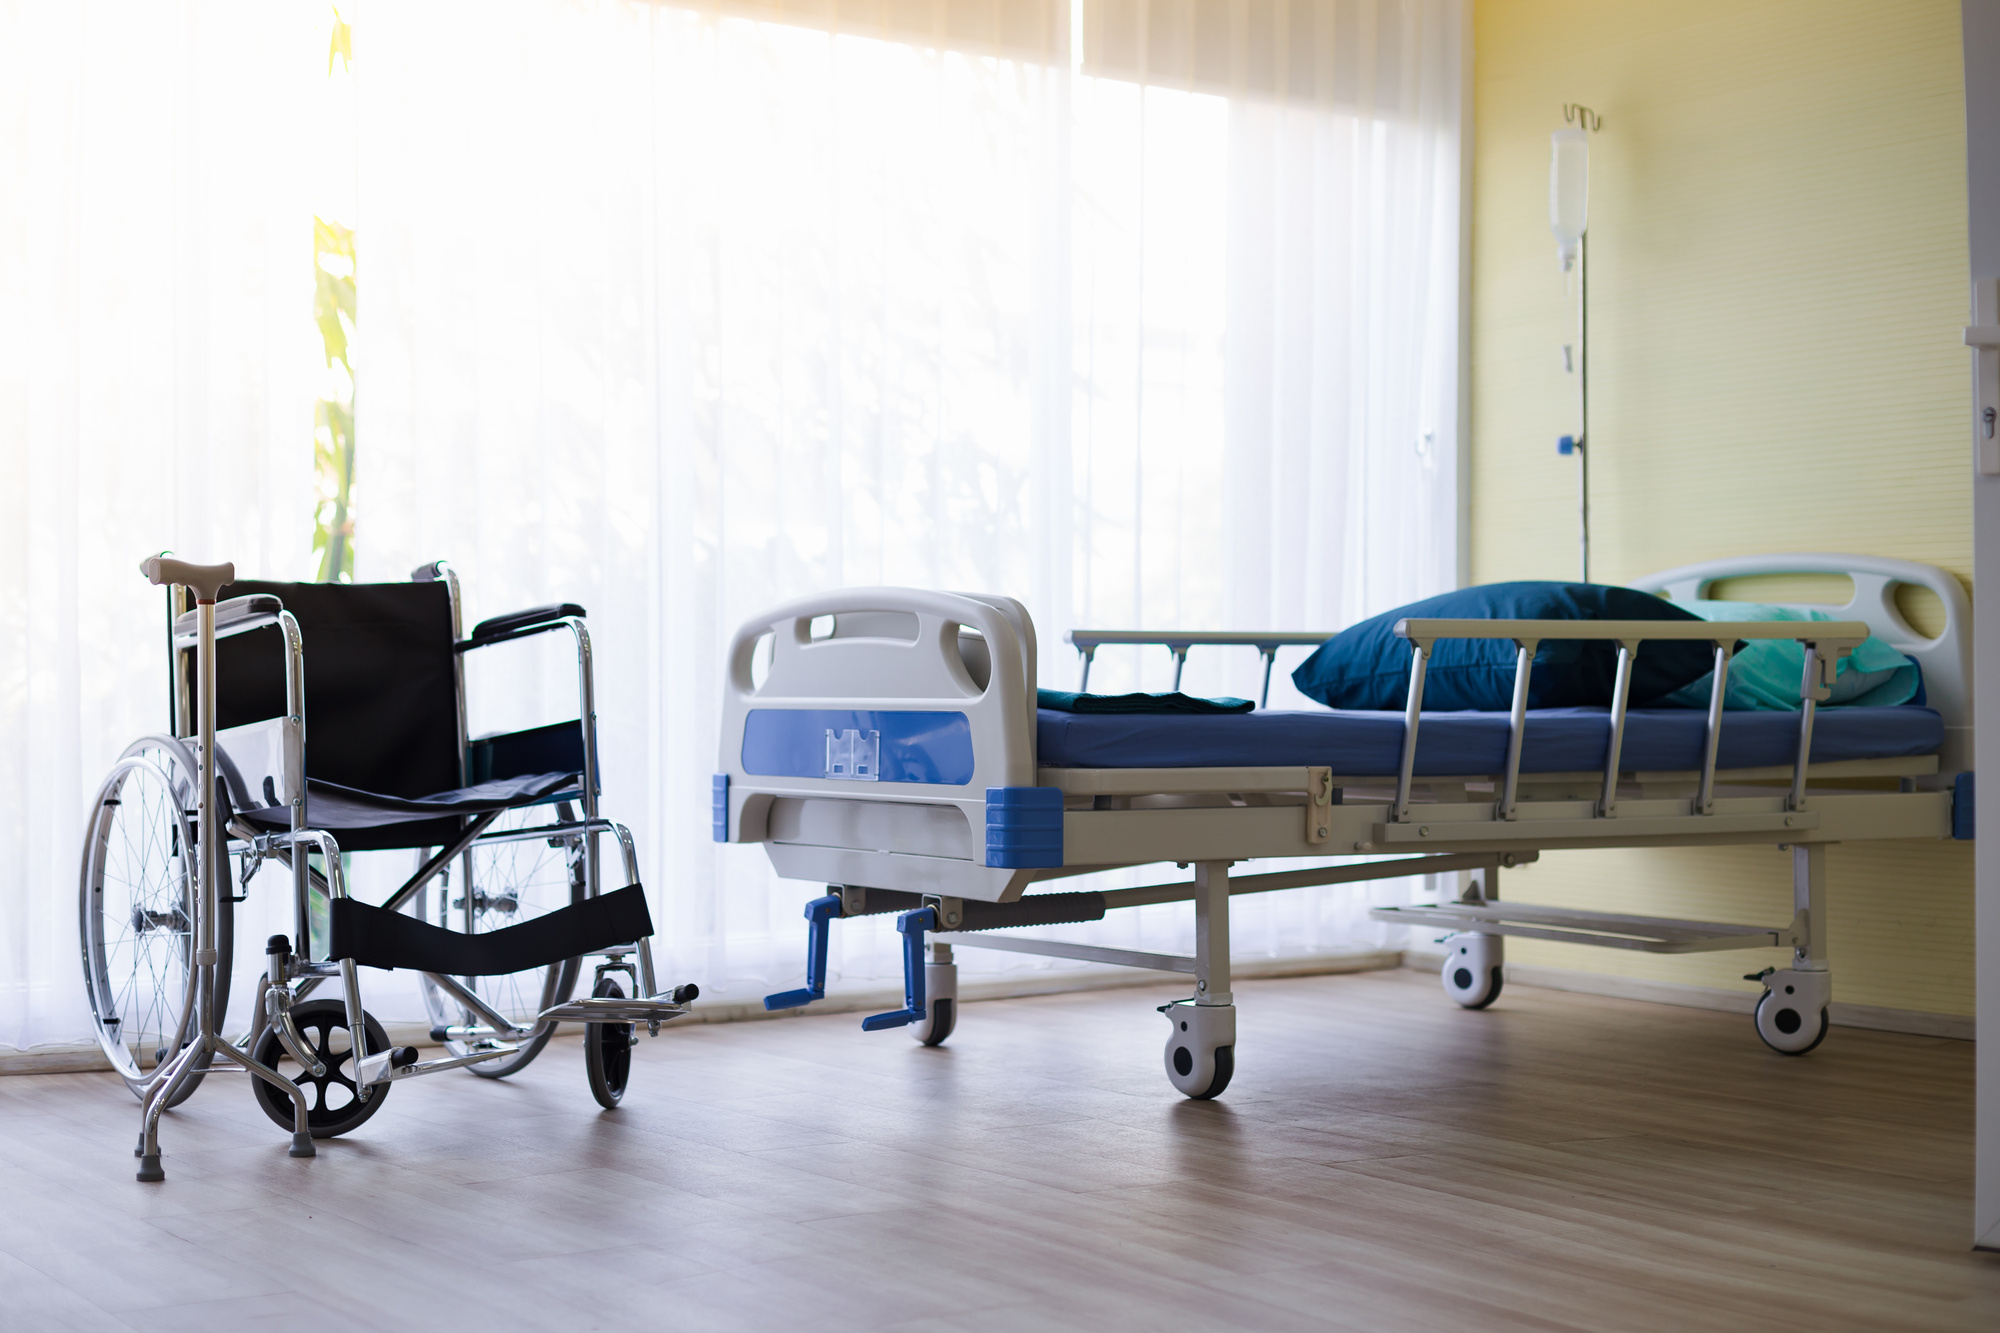 What is outpatient vs inpatient care? How much do you know about the differences between the two? Read on to learn more about the differences between them.